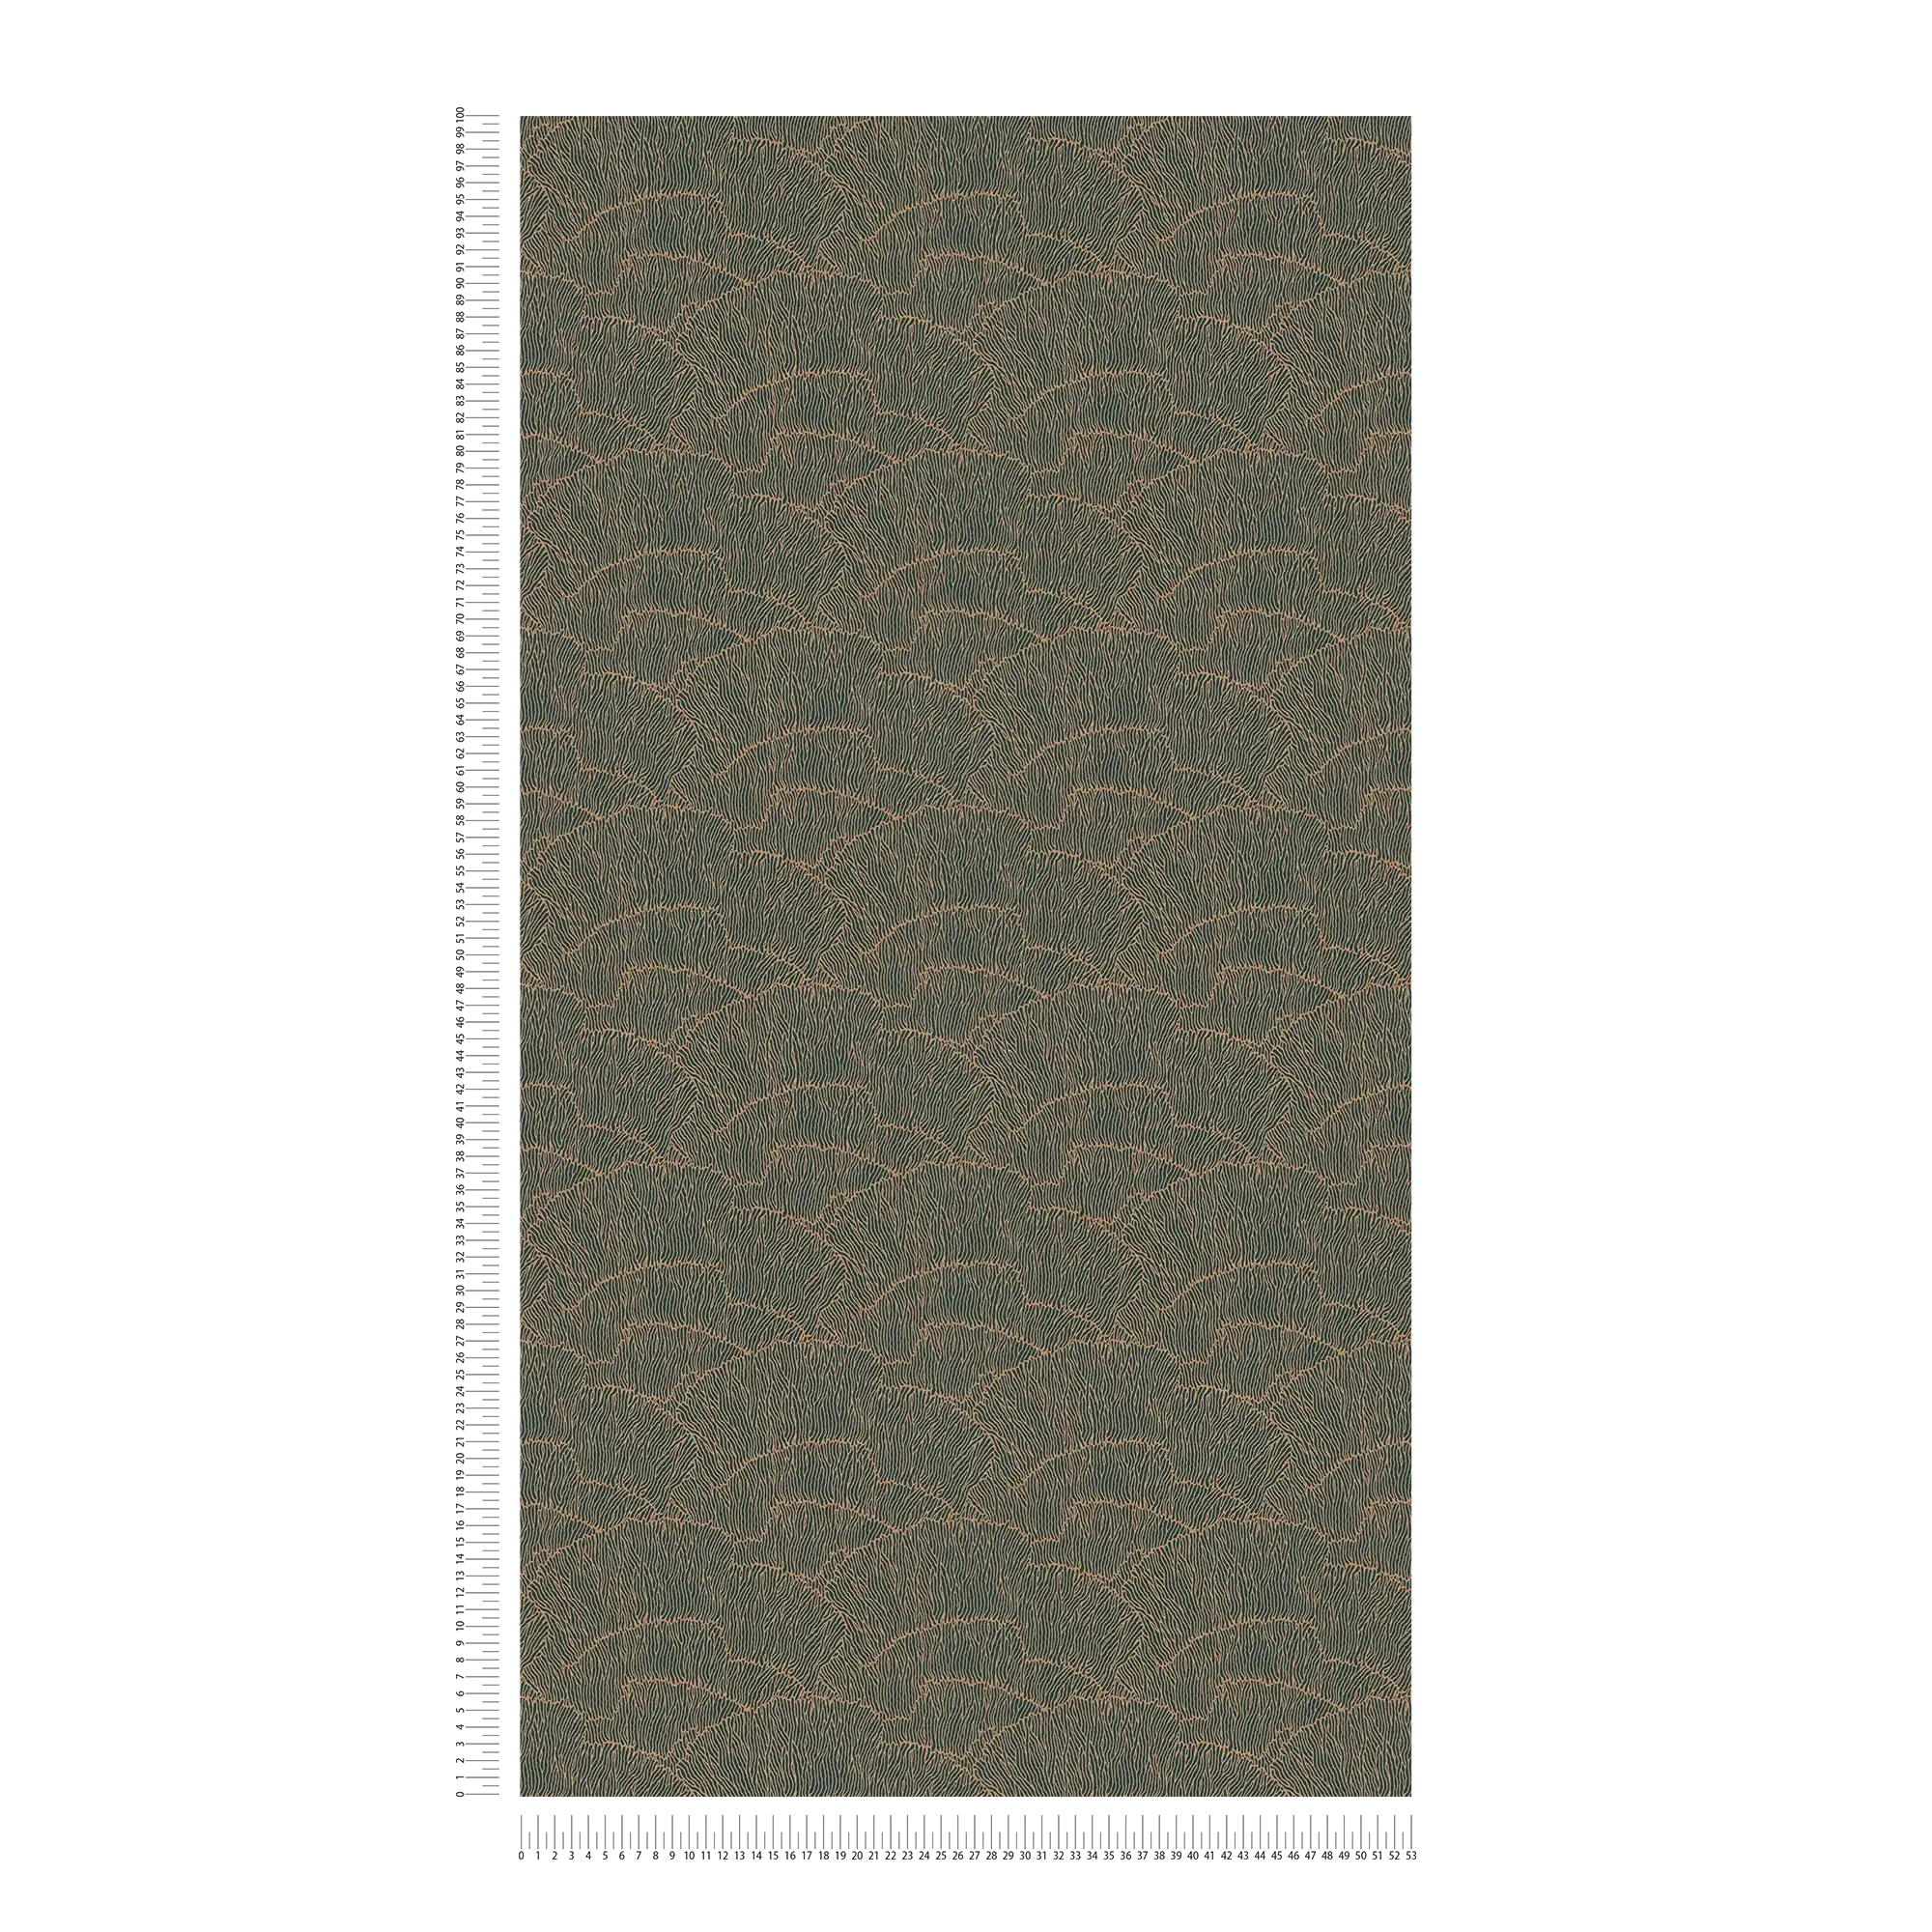             Non-woven wallpaper with abstract pattern - gold, green, metallic
        